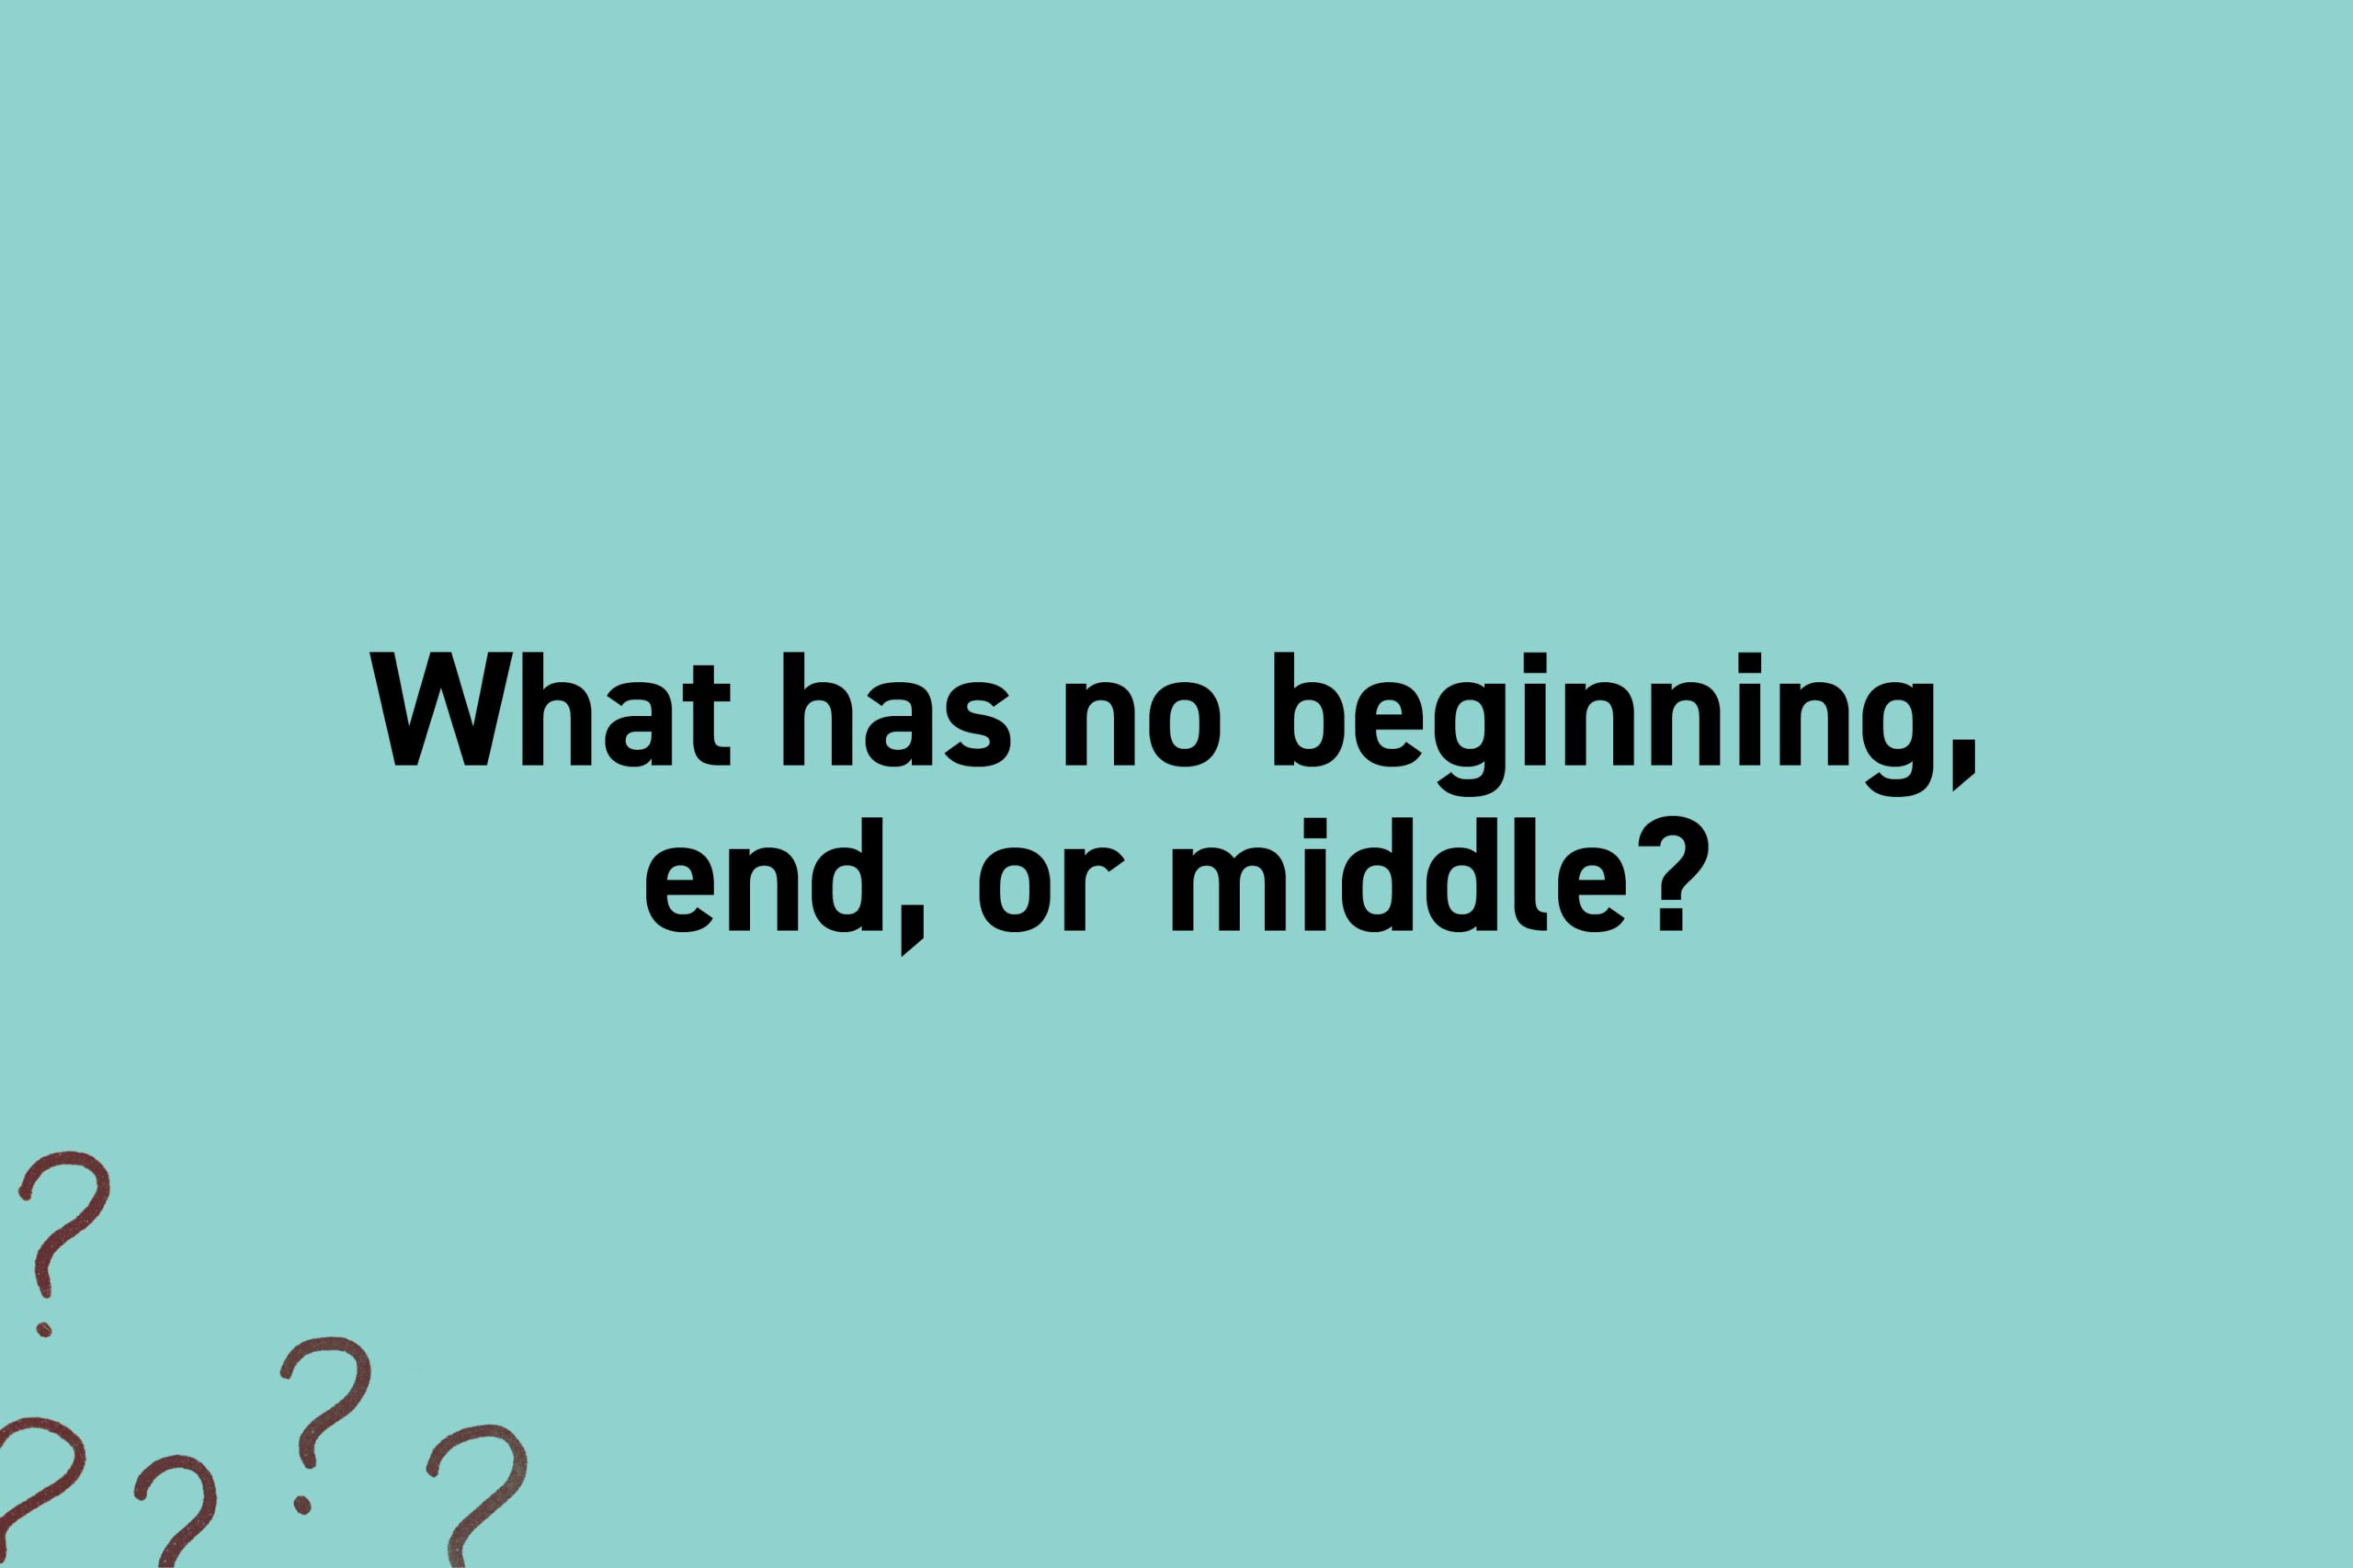 What has no beginning, end, or middle?